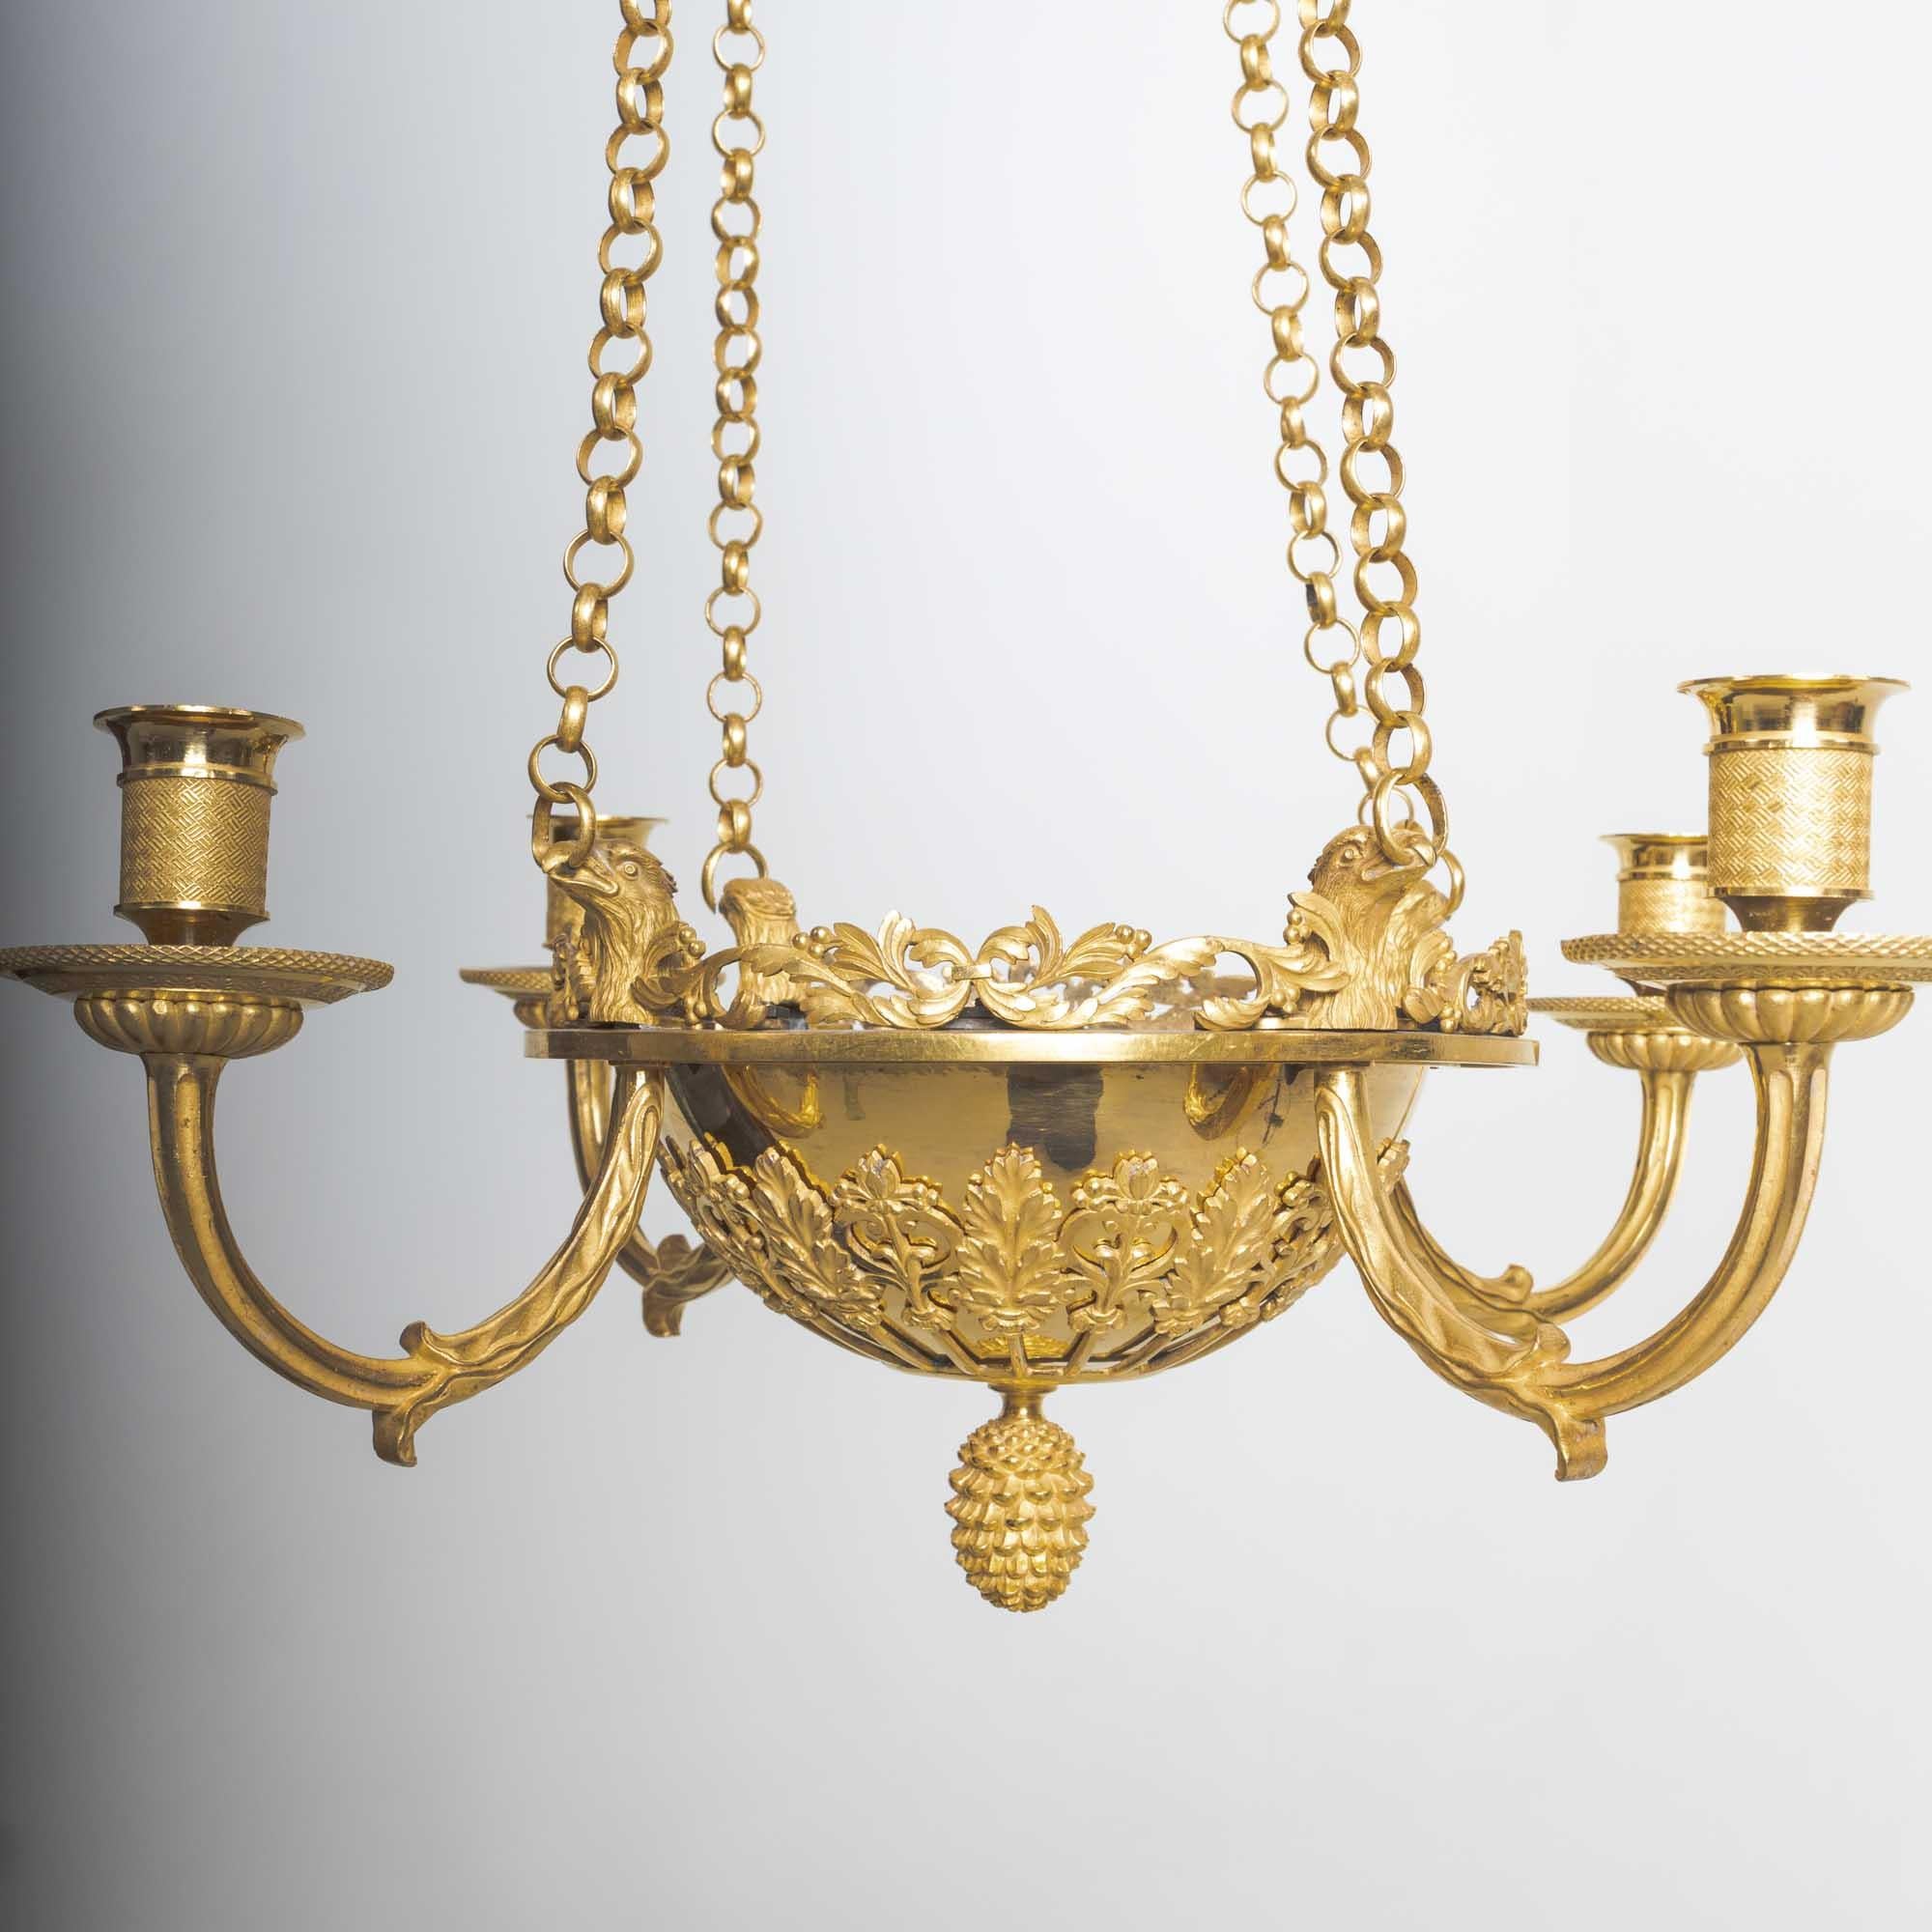 Four-armed chandelier made of fire-gilded bronze with eagle heads and acanthus leaf decor.